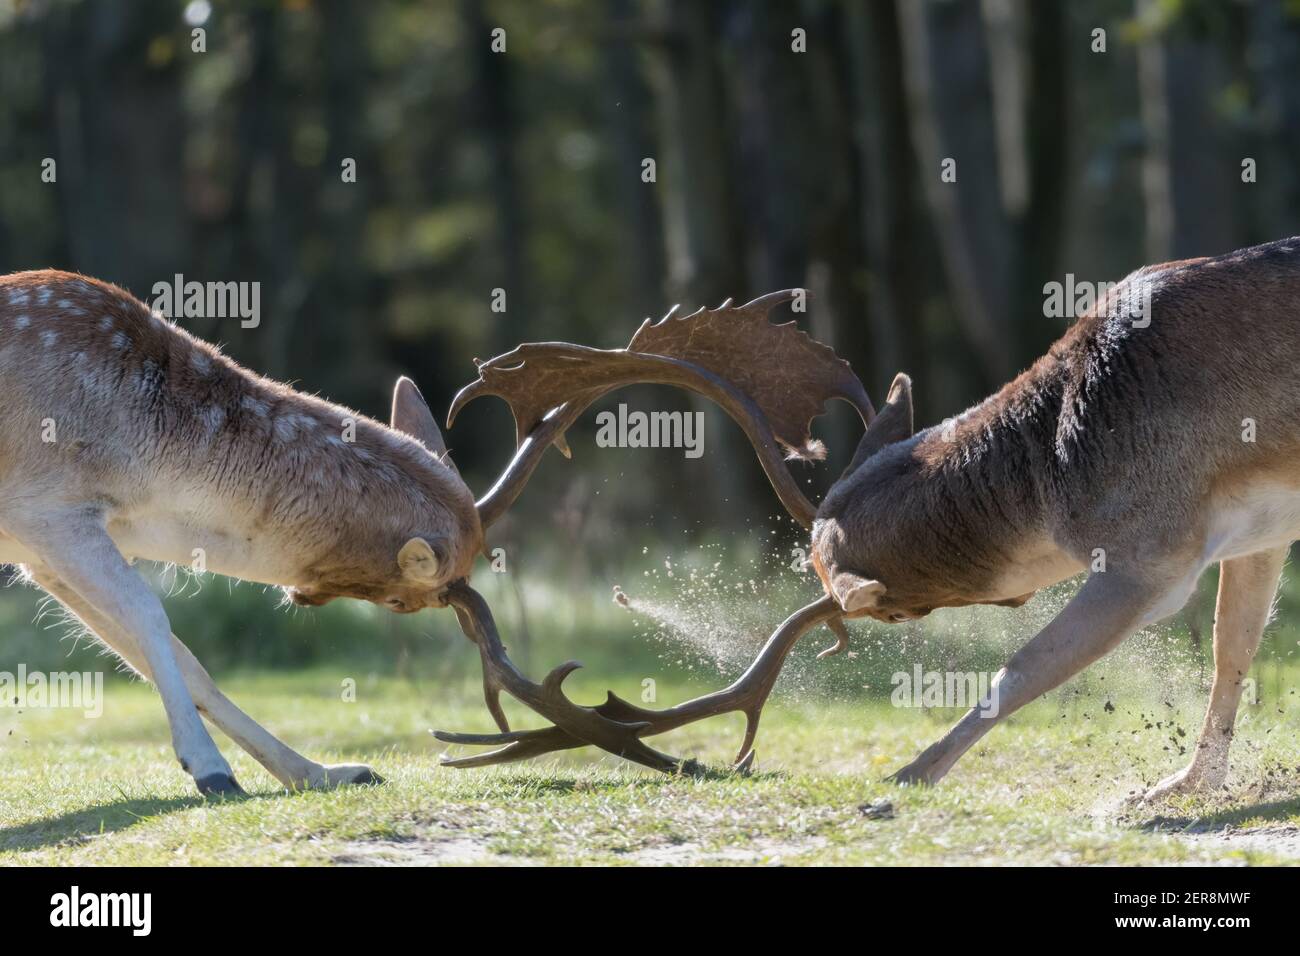 She's mine! No she's mine! Let's fight for it! Who will win? A fight between two fallow deer during rutting season, photographed in the Netherlands. Stock Photo